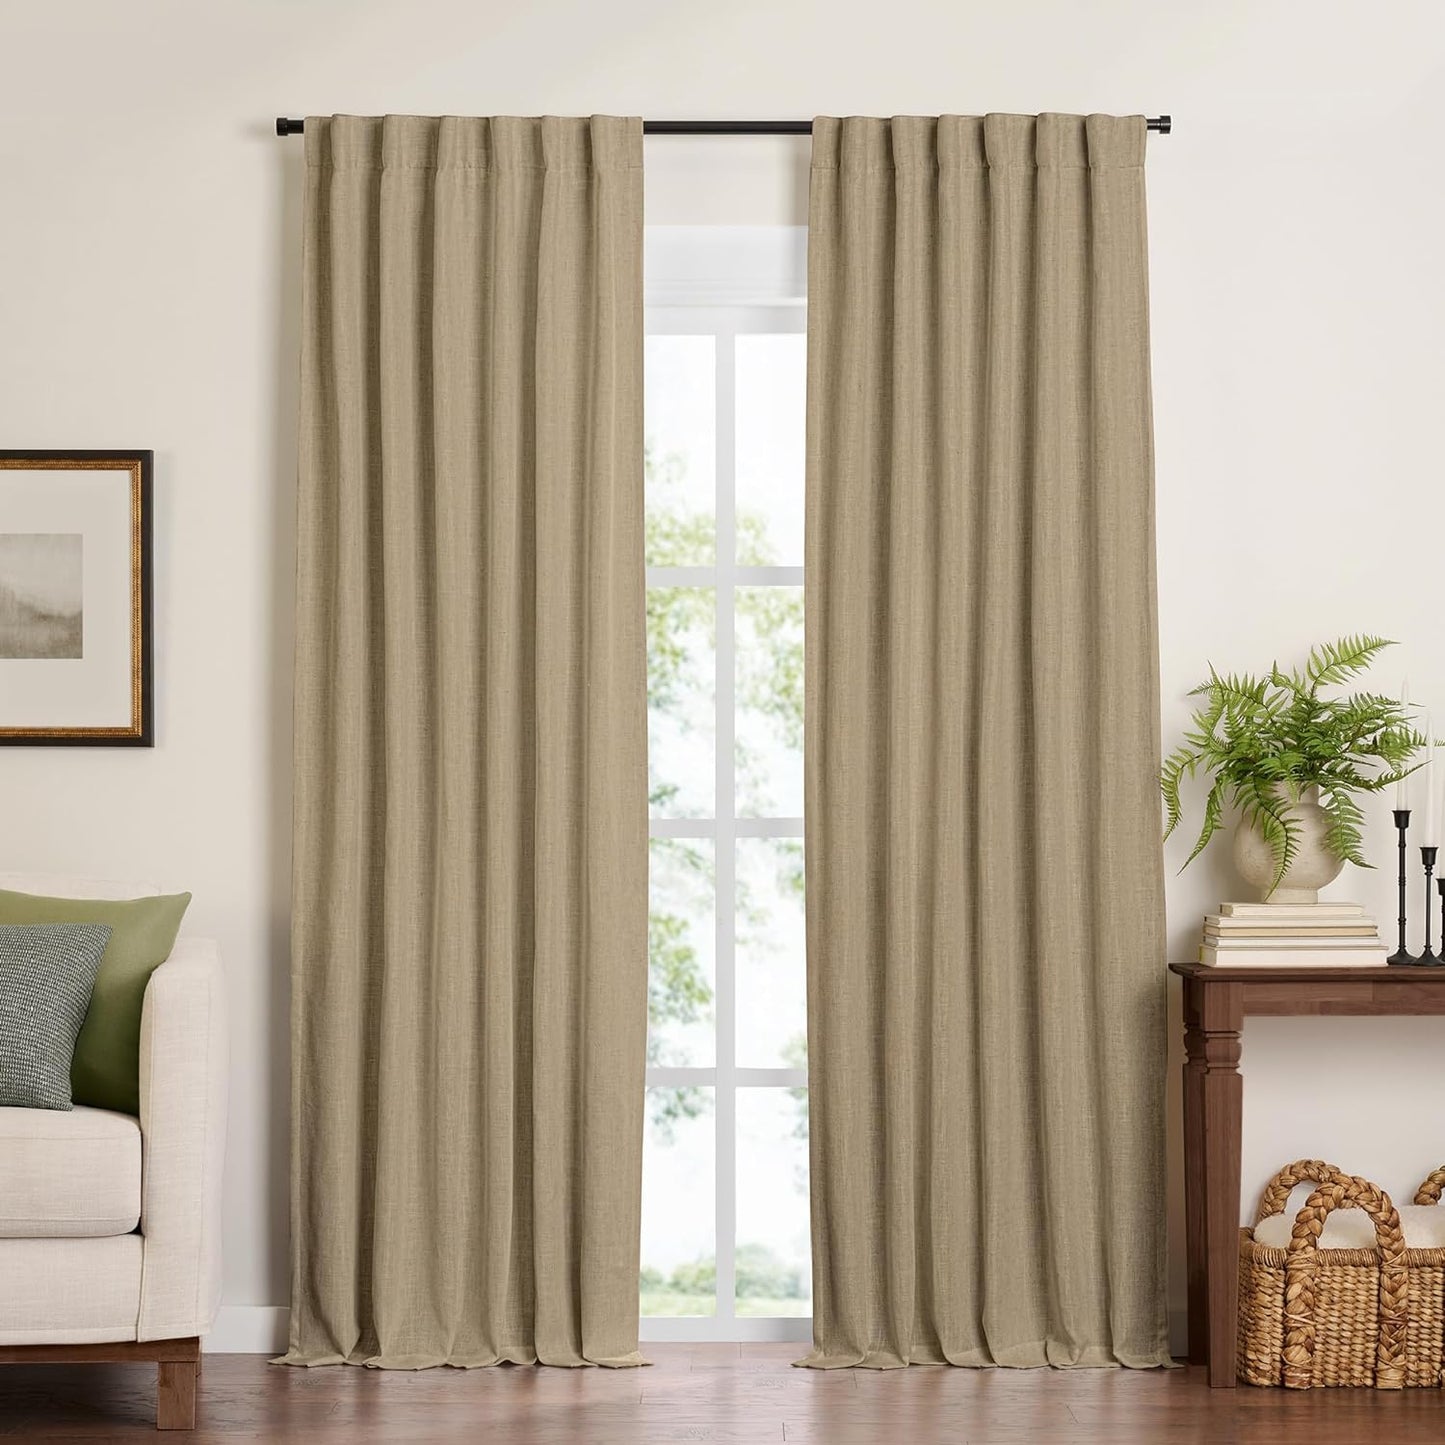 Elrene Home Fashions Harrow Solid Texture Blackout Single Window Curtain Panel, 52"X84", Natural  Elrene Home Fashions Linen 52"X108" (1 Panel) 